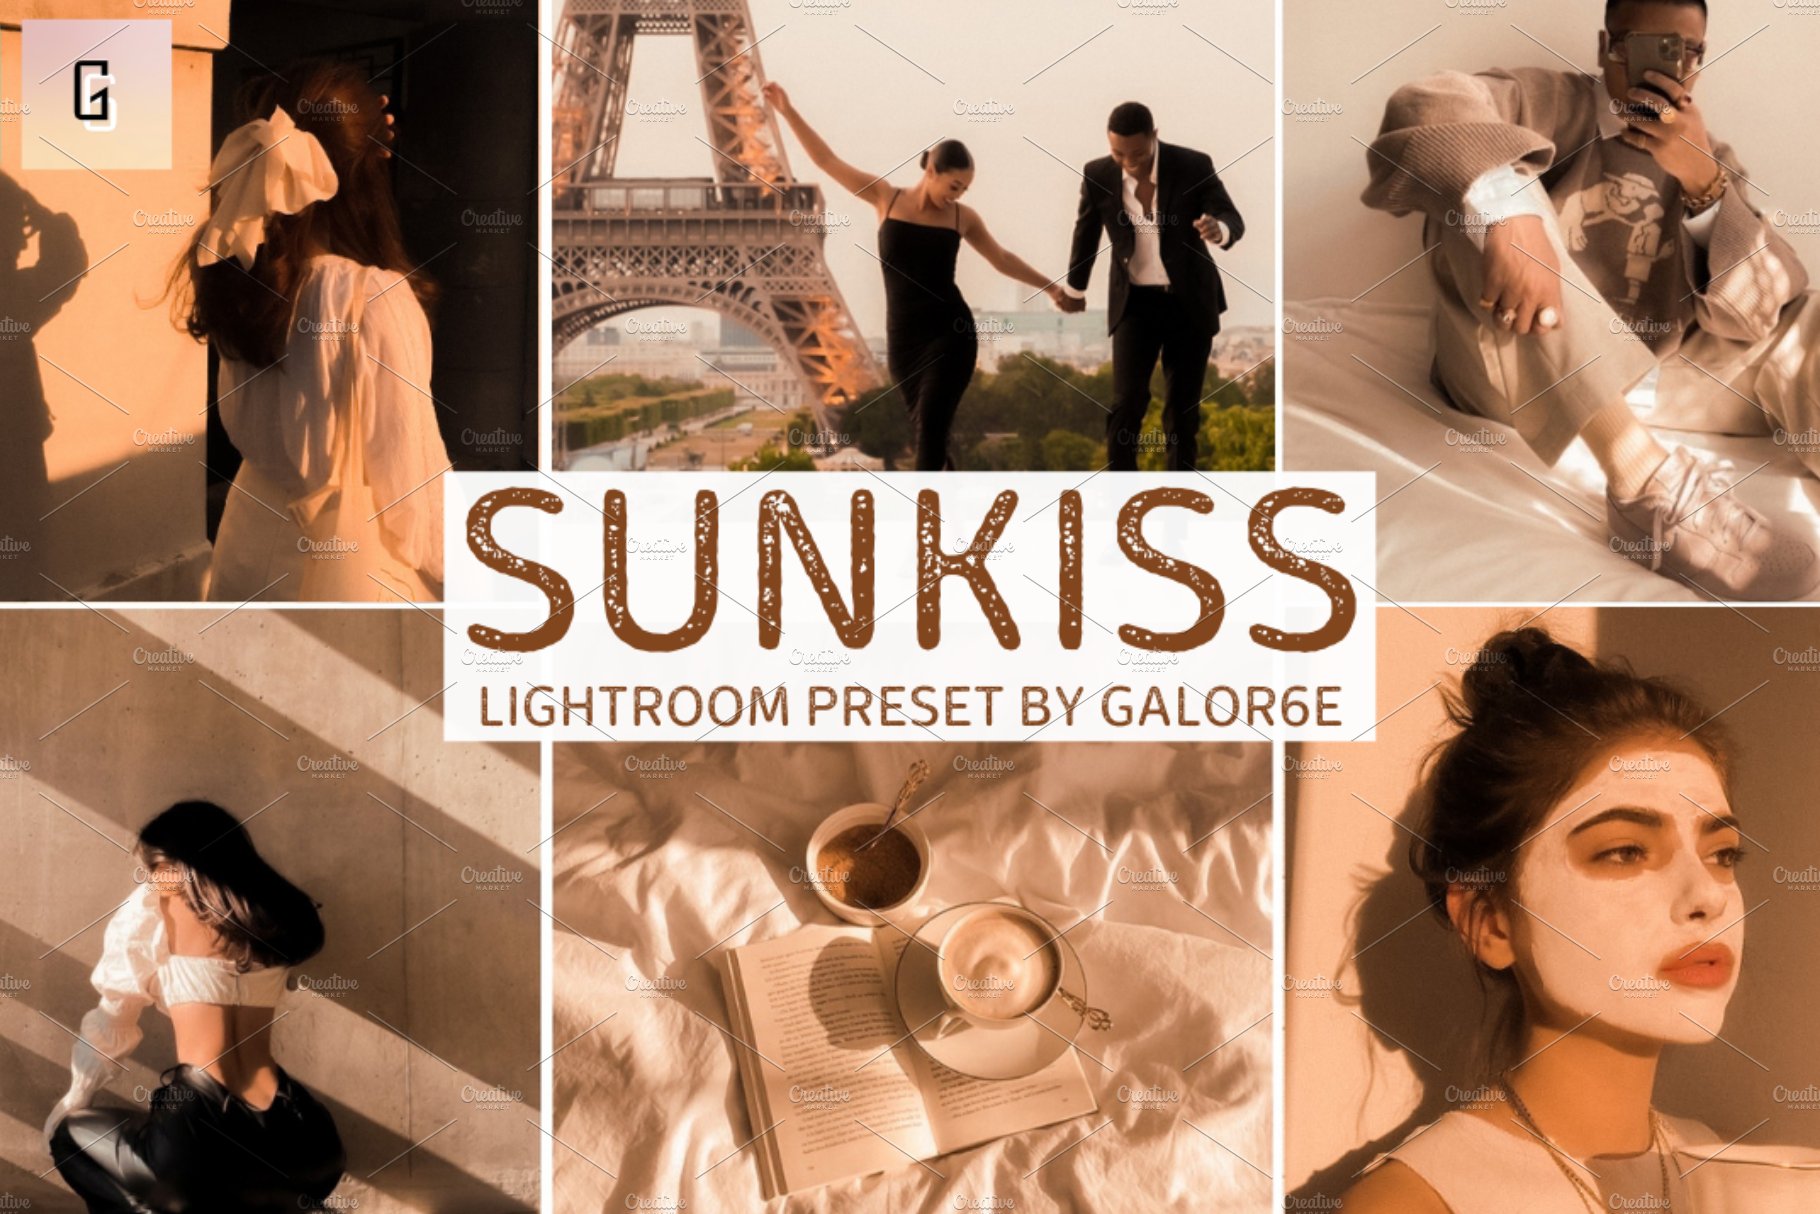 Lightroom Preset SUNKISS by GALOR6Ecover image.